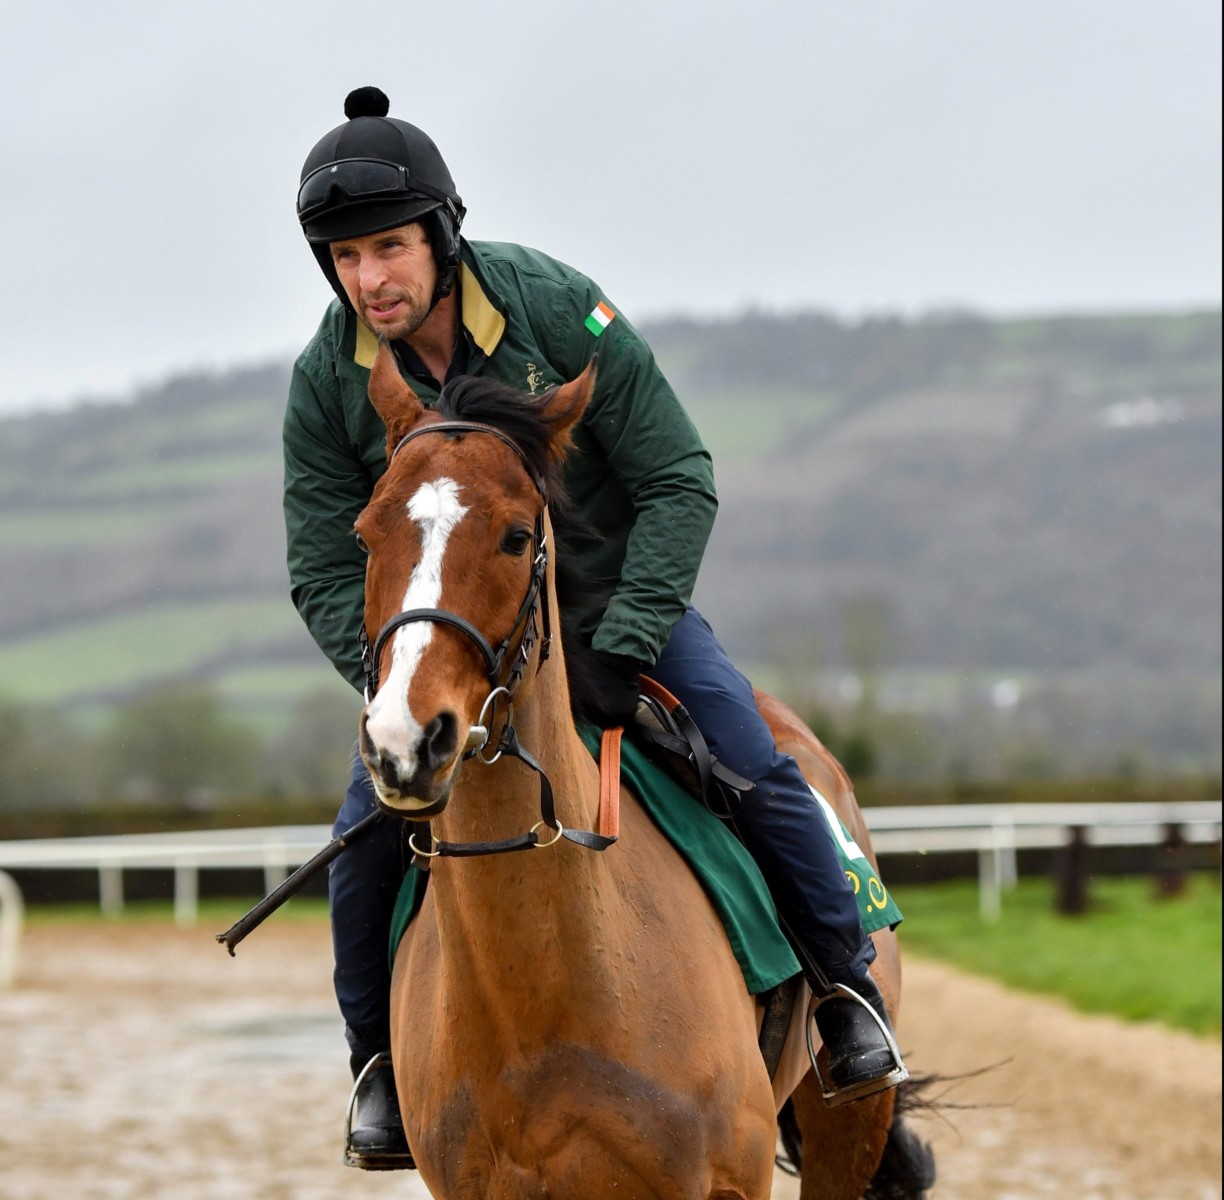 , Faugheen The Machine is back in full working order says work rider John Codd as the legend heads back to Cheltenham